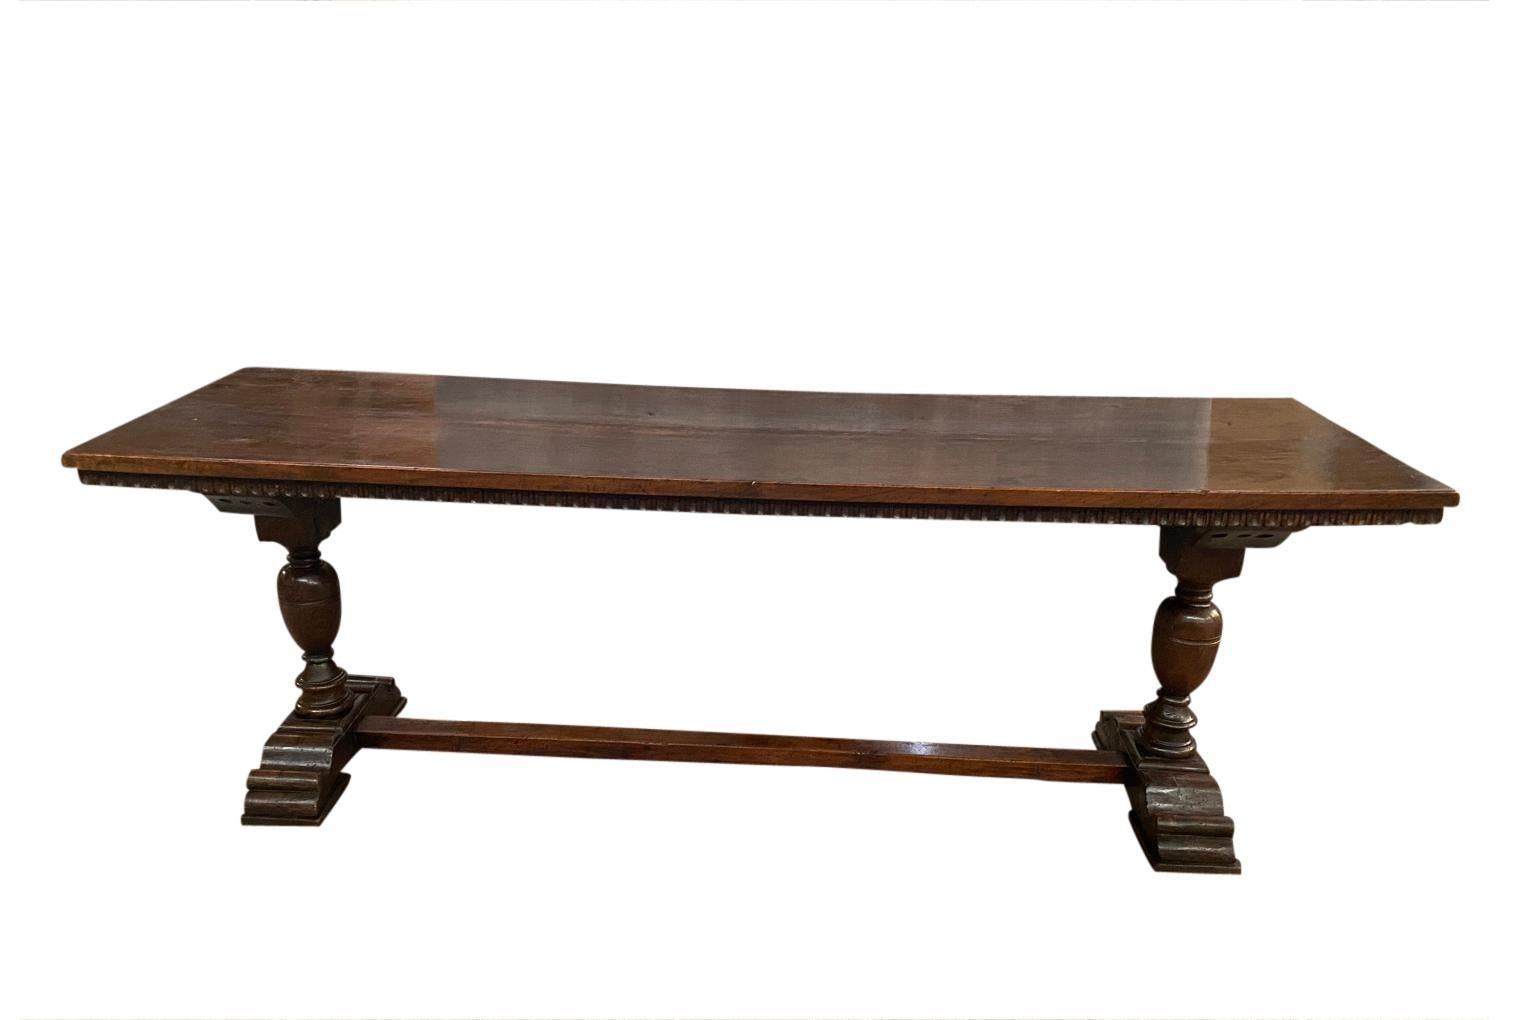 A very stunning 18th century Console Table from the Lombardy region of Italy.  Beautifully constructed from handsome walnut with baluster legs and dentilated carving detail.  Gorgeous patina.